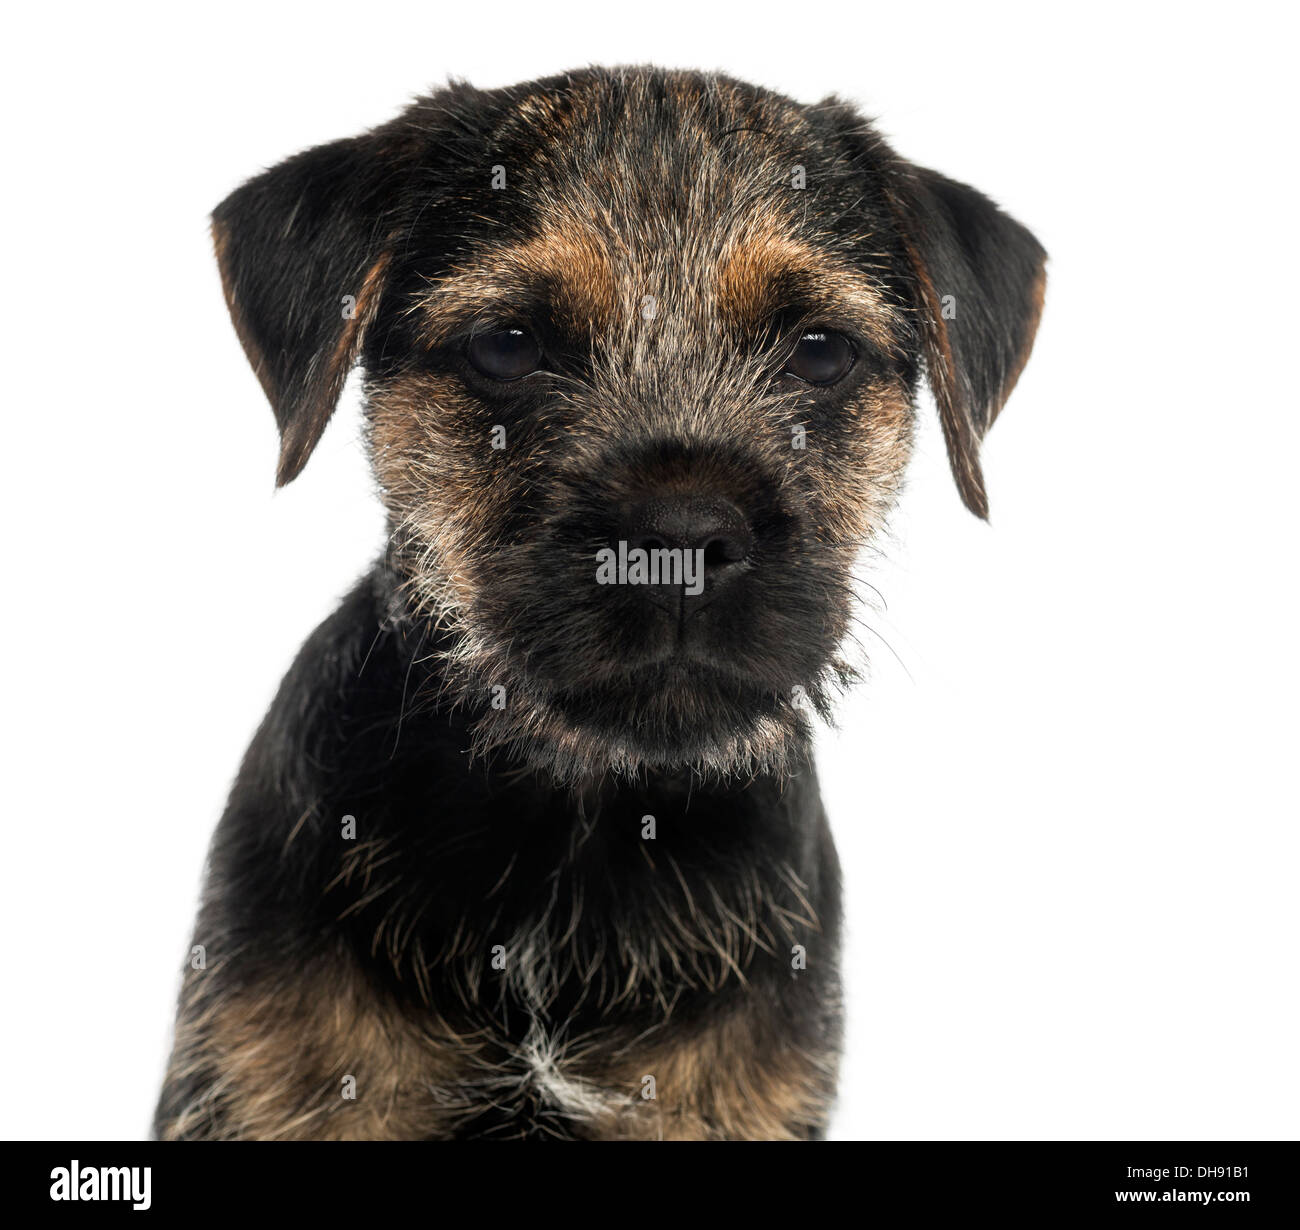 Close Up Of A Border Terrier Puppy Looking At The Camera Against Stock Photo Alamy